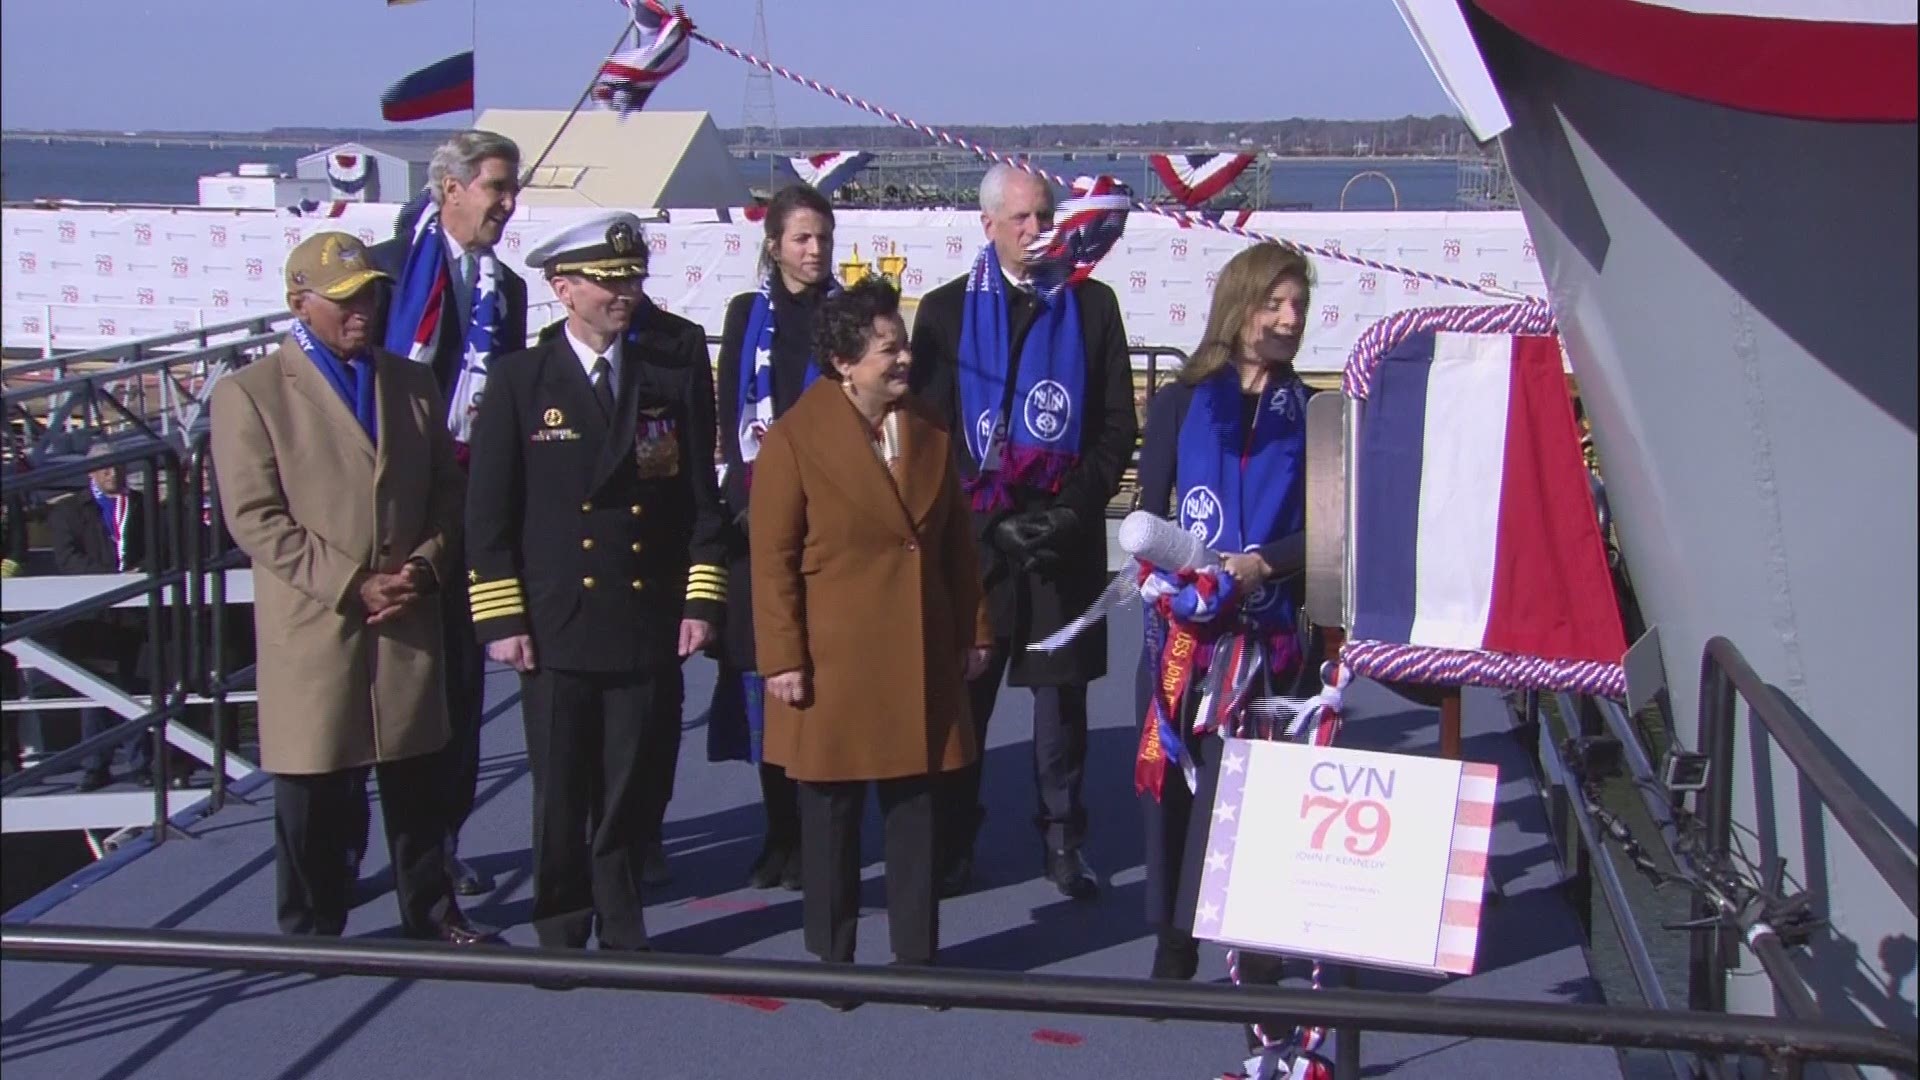 Caroline Kennedy officially christened the new Navy aircraft carrier bearing her late father’s name (CVN-79)